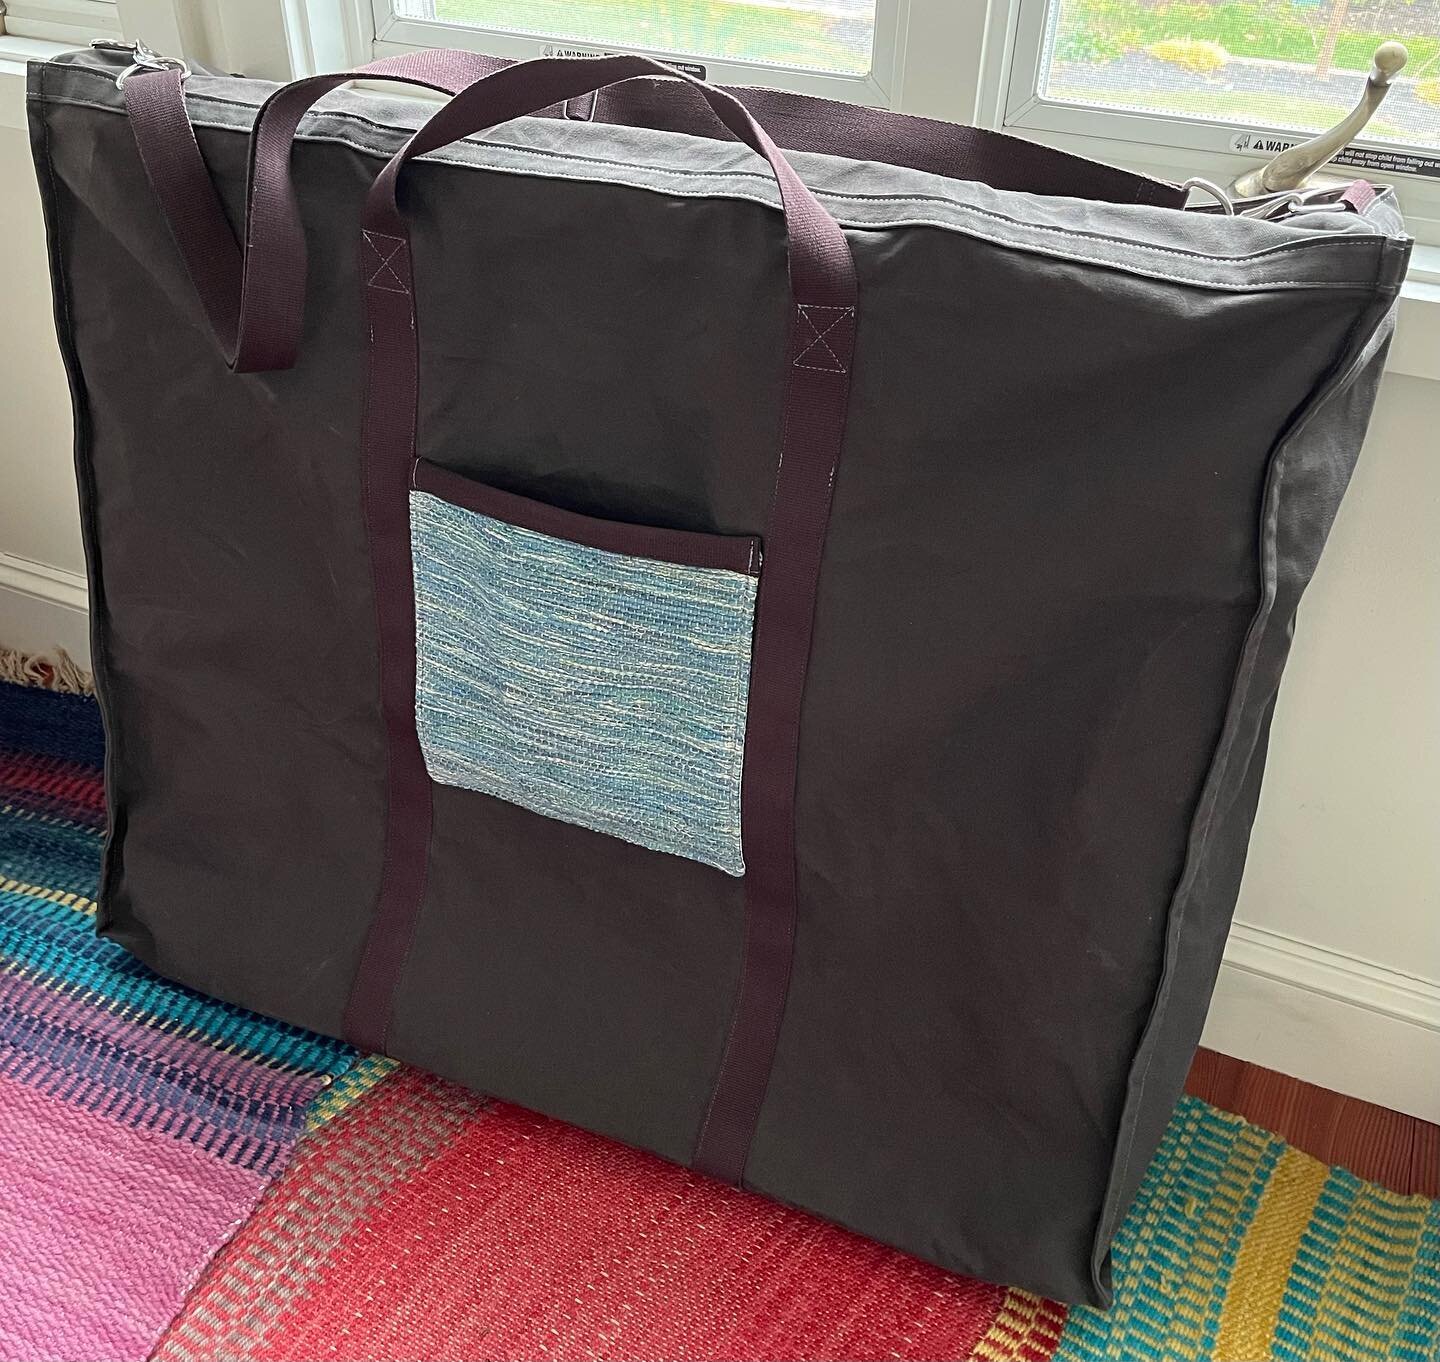 Custom loom bag!
This was made for a Louet Jane 70cm with pockets on either side made from my client&rsquo;s lovely handwoven fabric. 
The biggest bag I&rsquo;ve ever made! #handmade #custom #loom #louet #handwoven